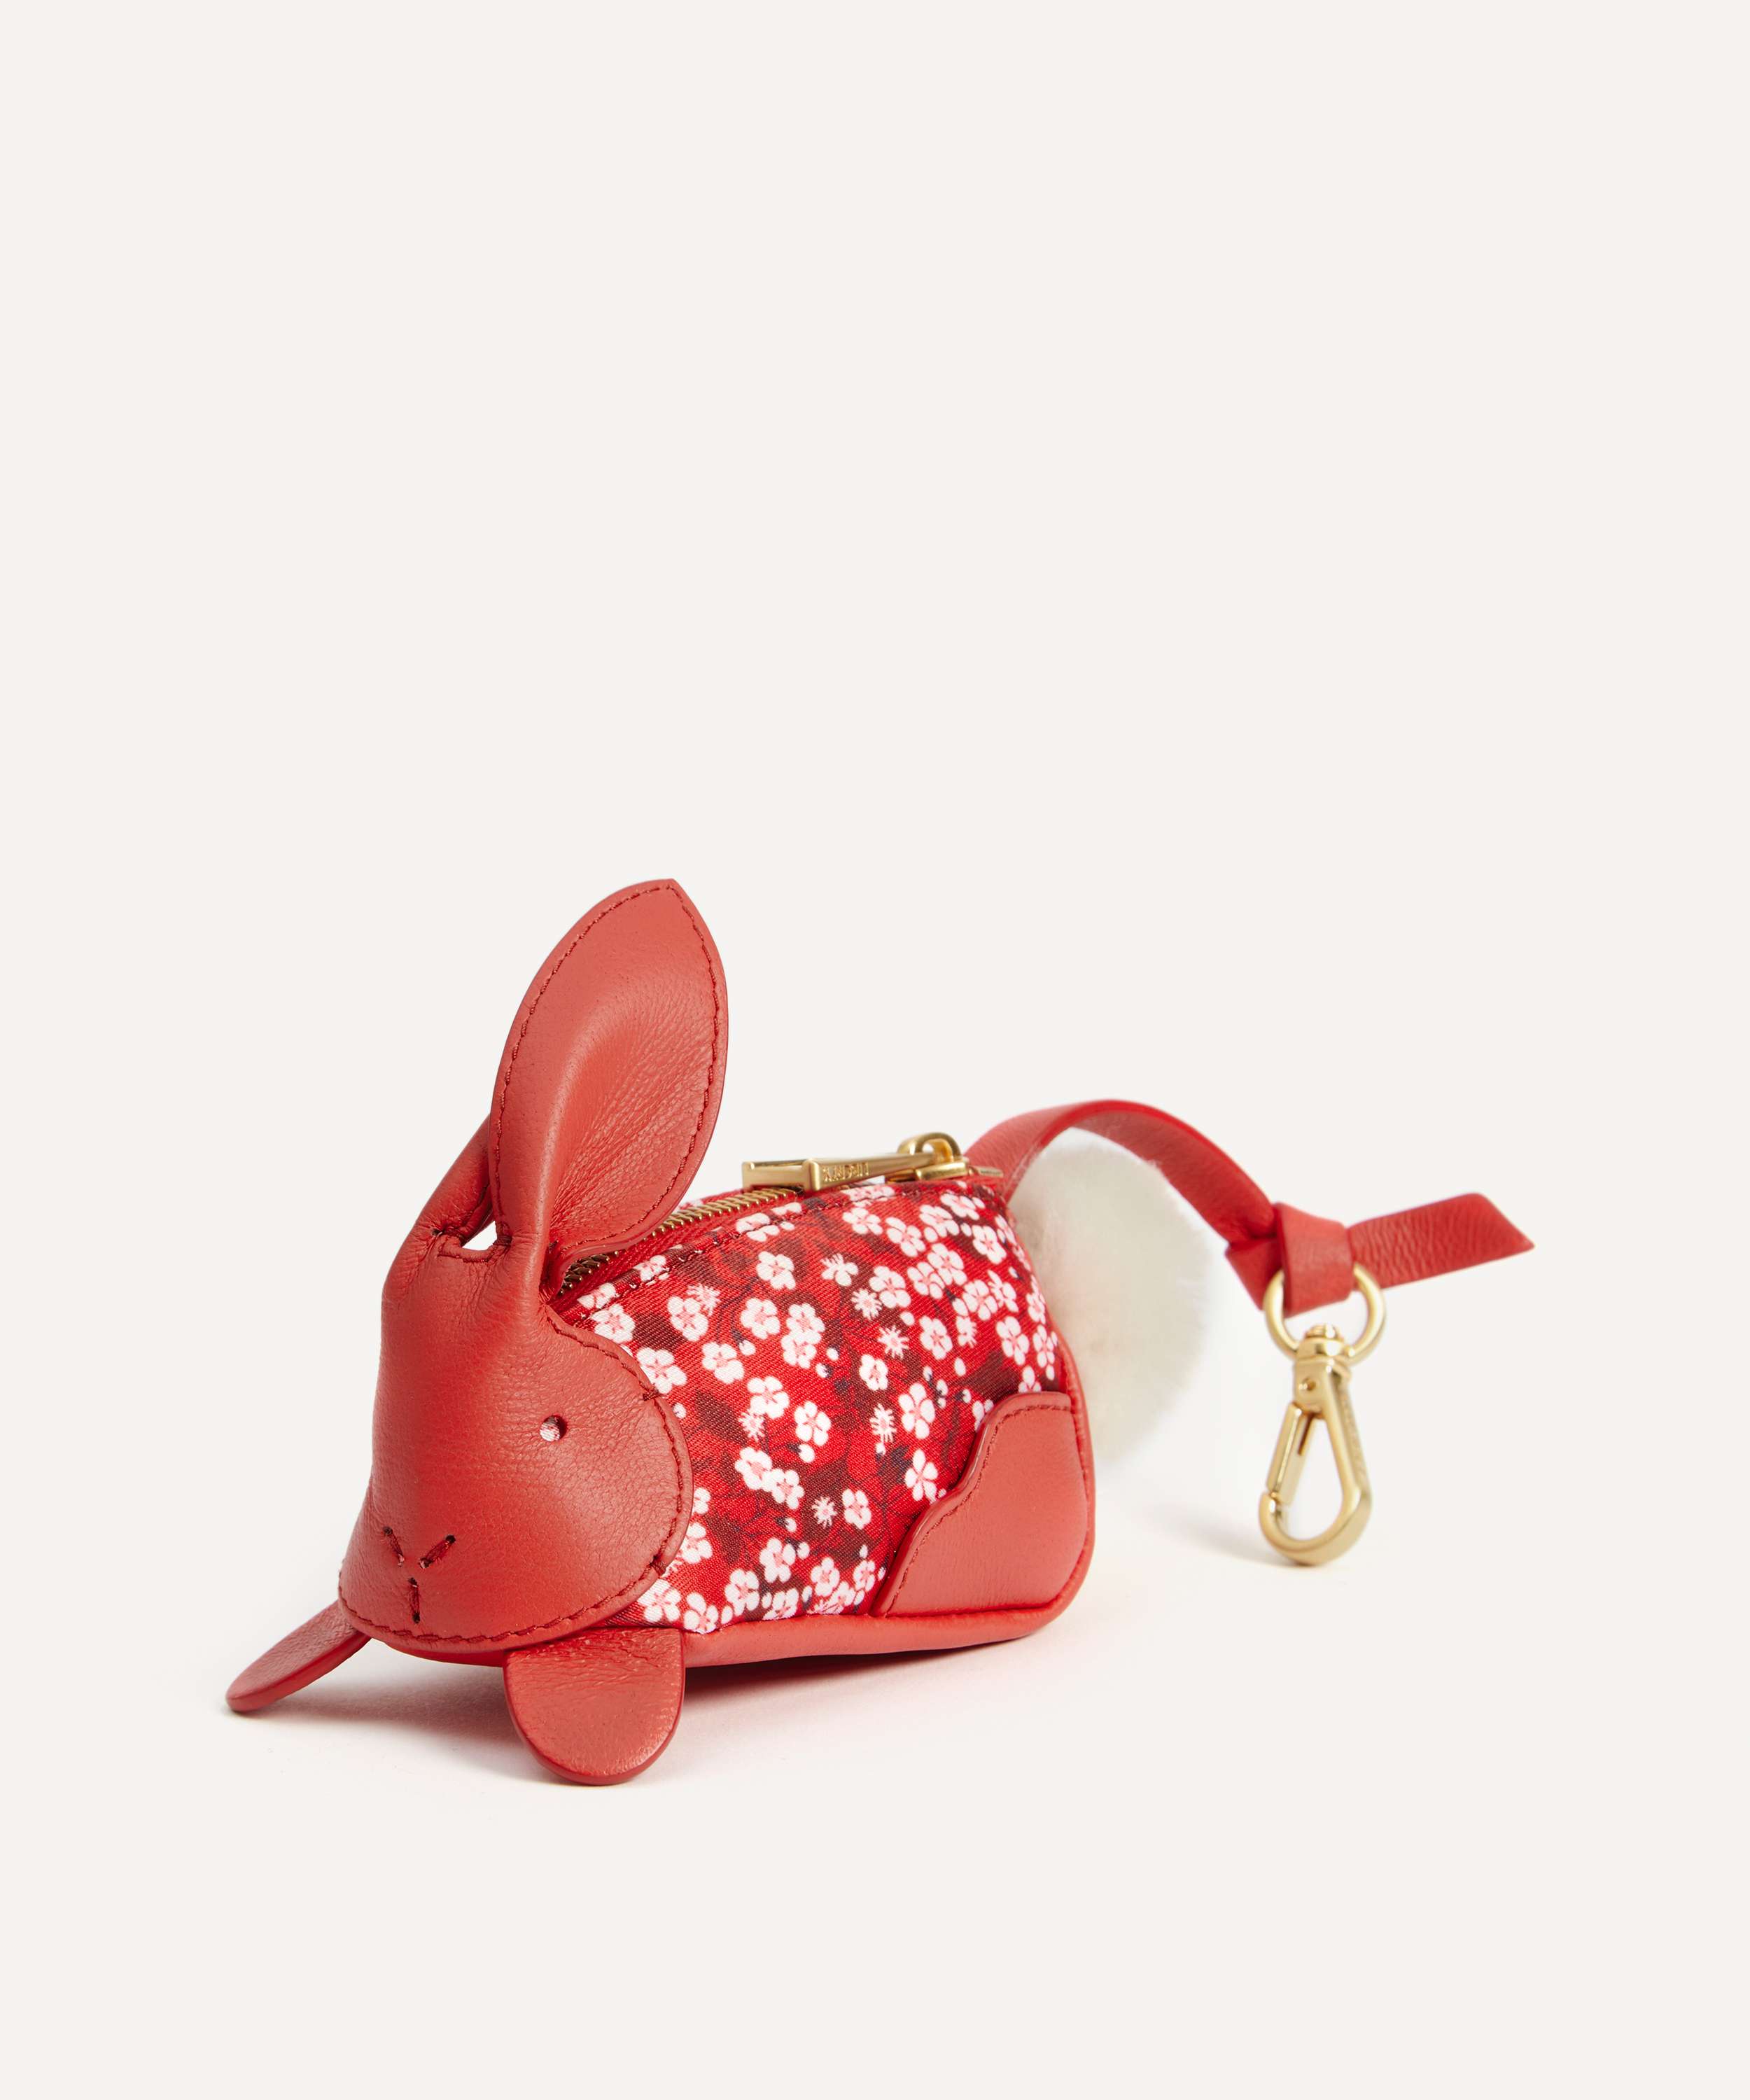 NEW COLLECTION LOUIS VUITTON BUNNY CHARM /LUNAR NEW YEAR OF THE